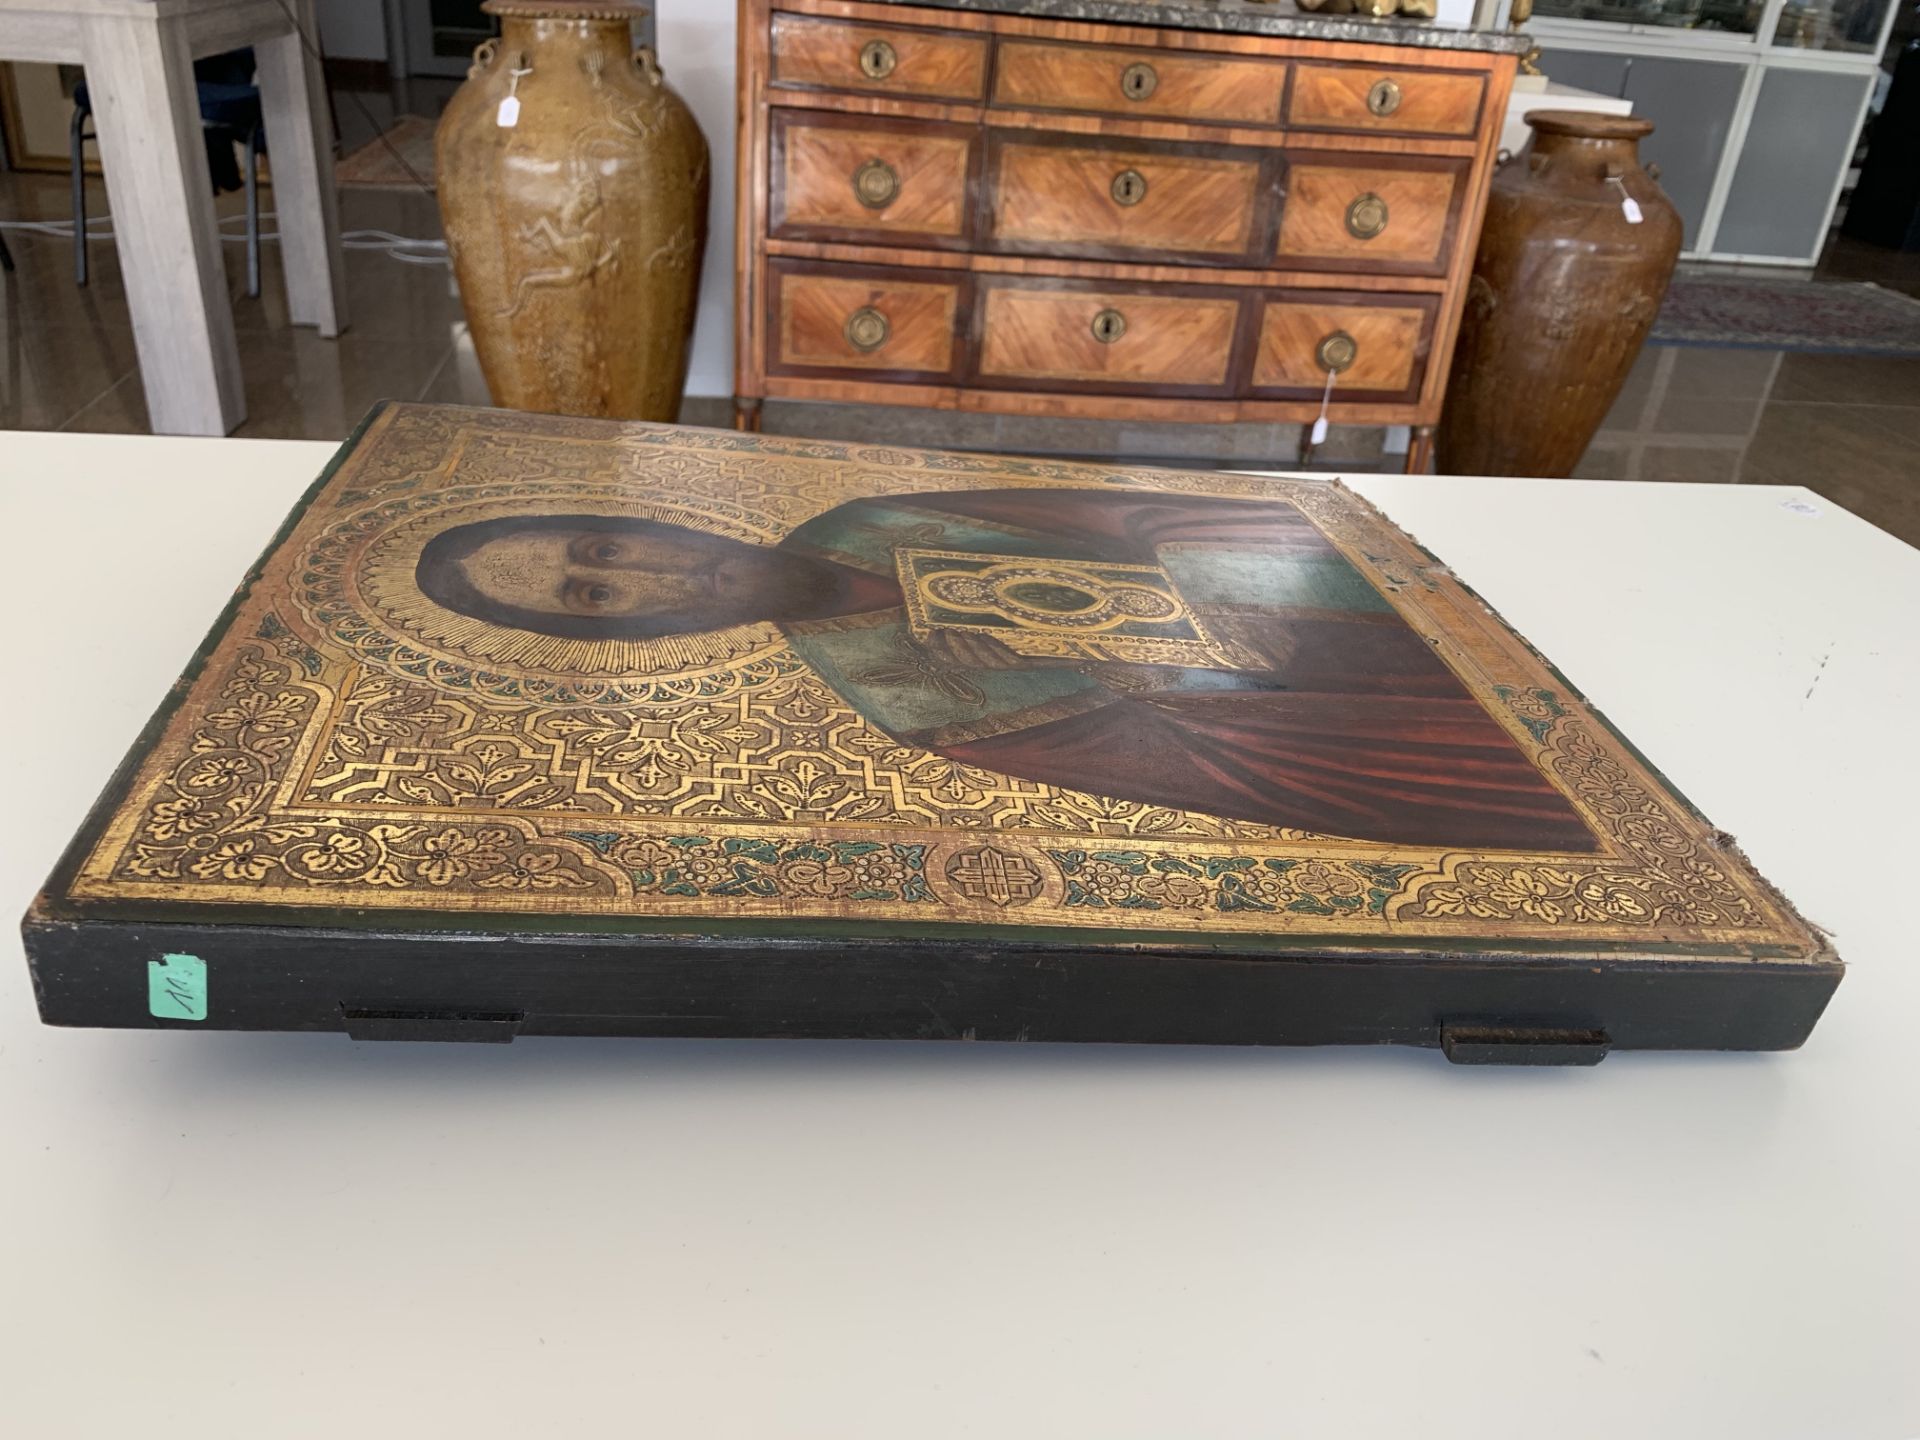 Two large Russian icons, 'Christ Pantocrator' and 'Saint Nicholas', 18th/19th C. - Image 15 of 21